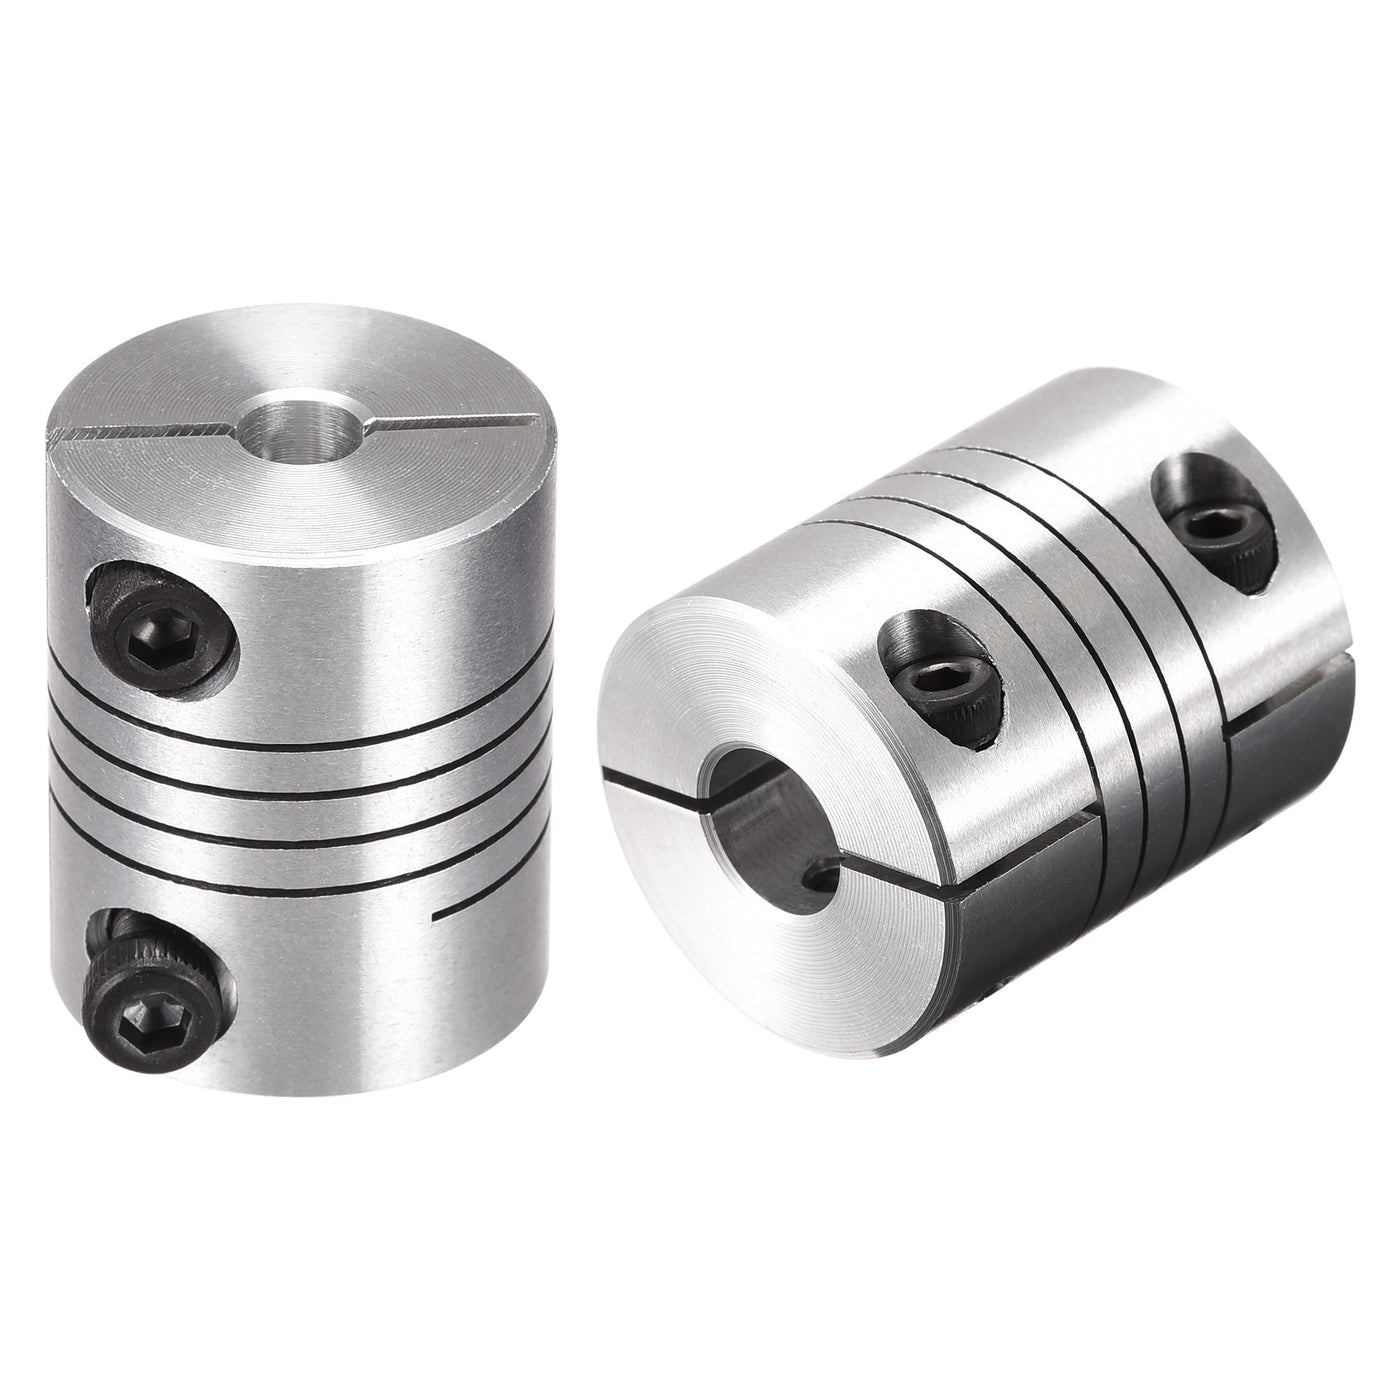 uxcell Uxcell 2PCS Motor Shaft 5mm to 10mm Helical Beam Coupler Coupling 25mm Dia 30mm Length